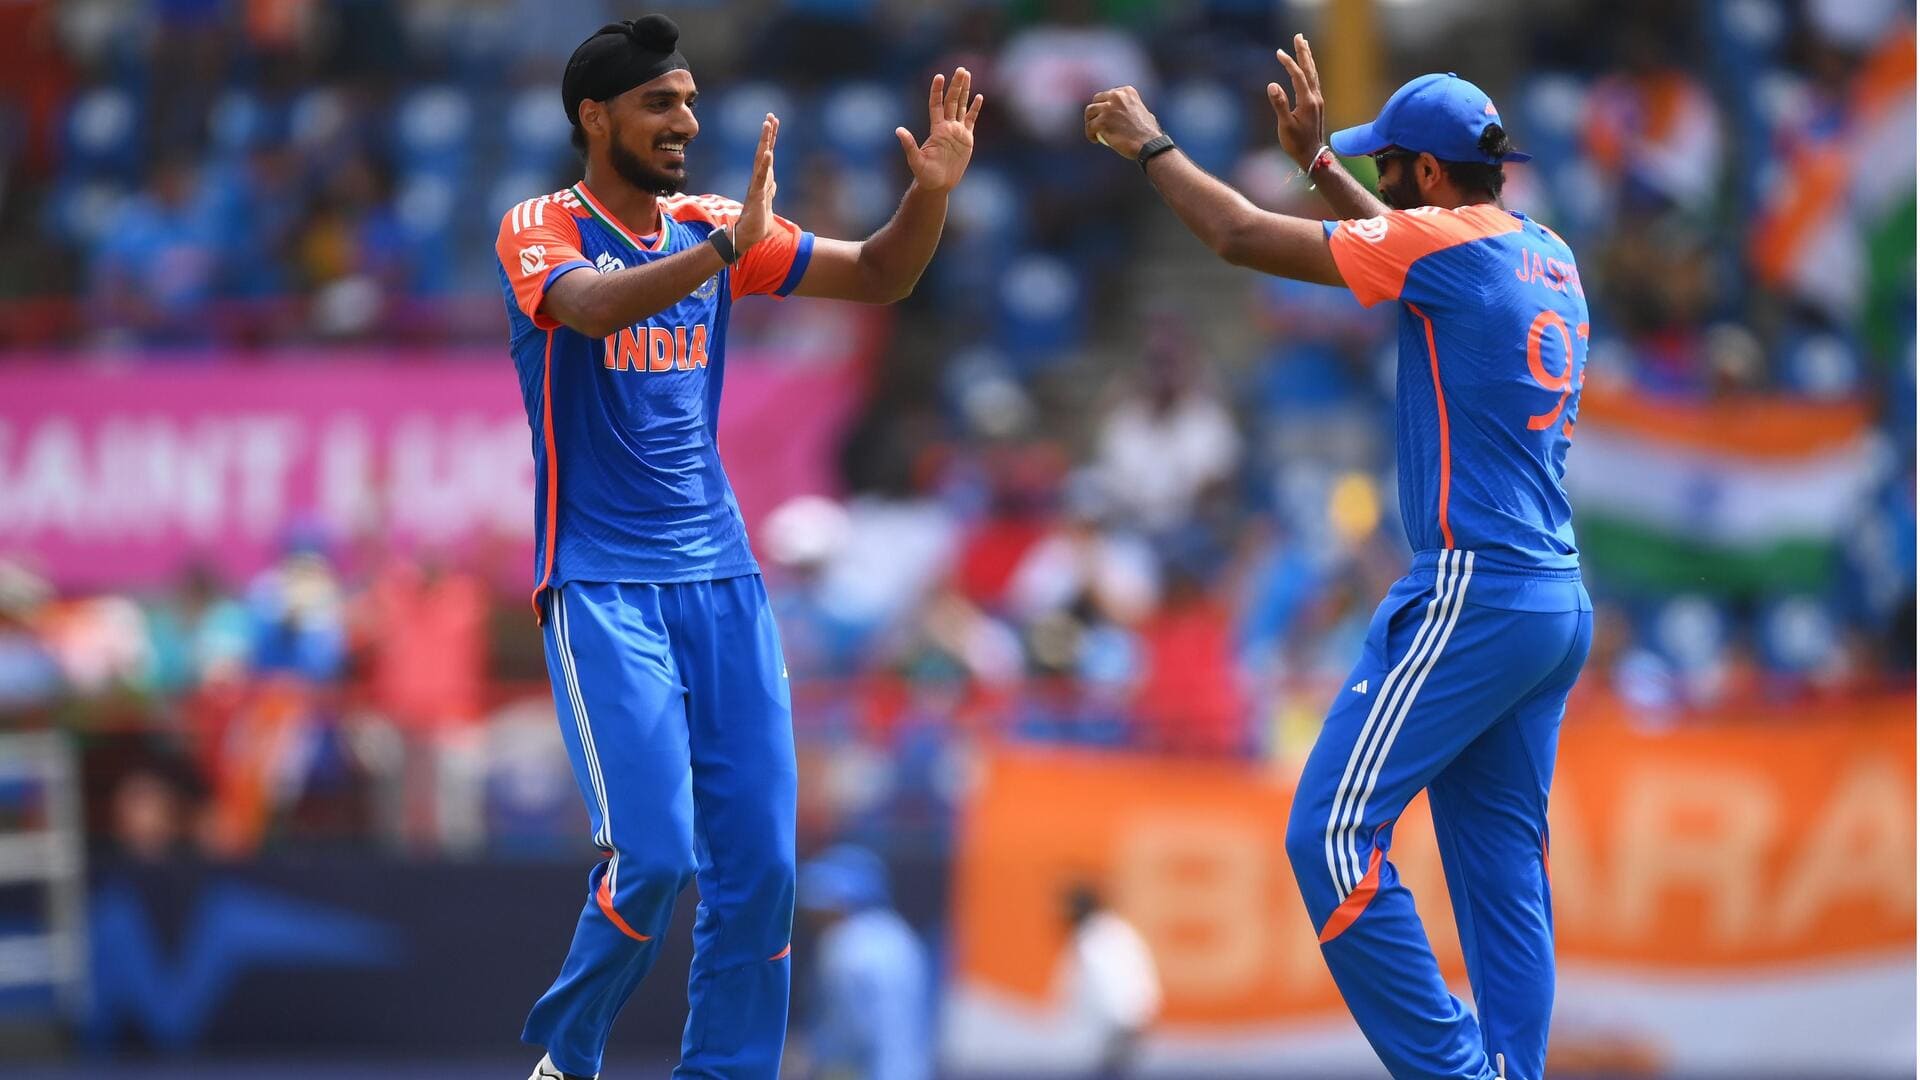 T20 World Cup: Arshdeep Singh becomes India's second-highest wicket-taker